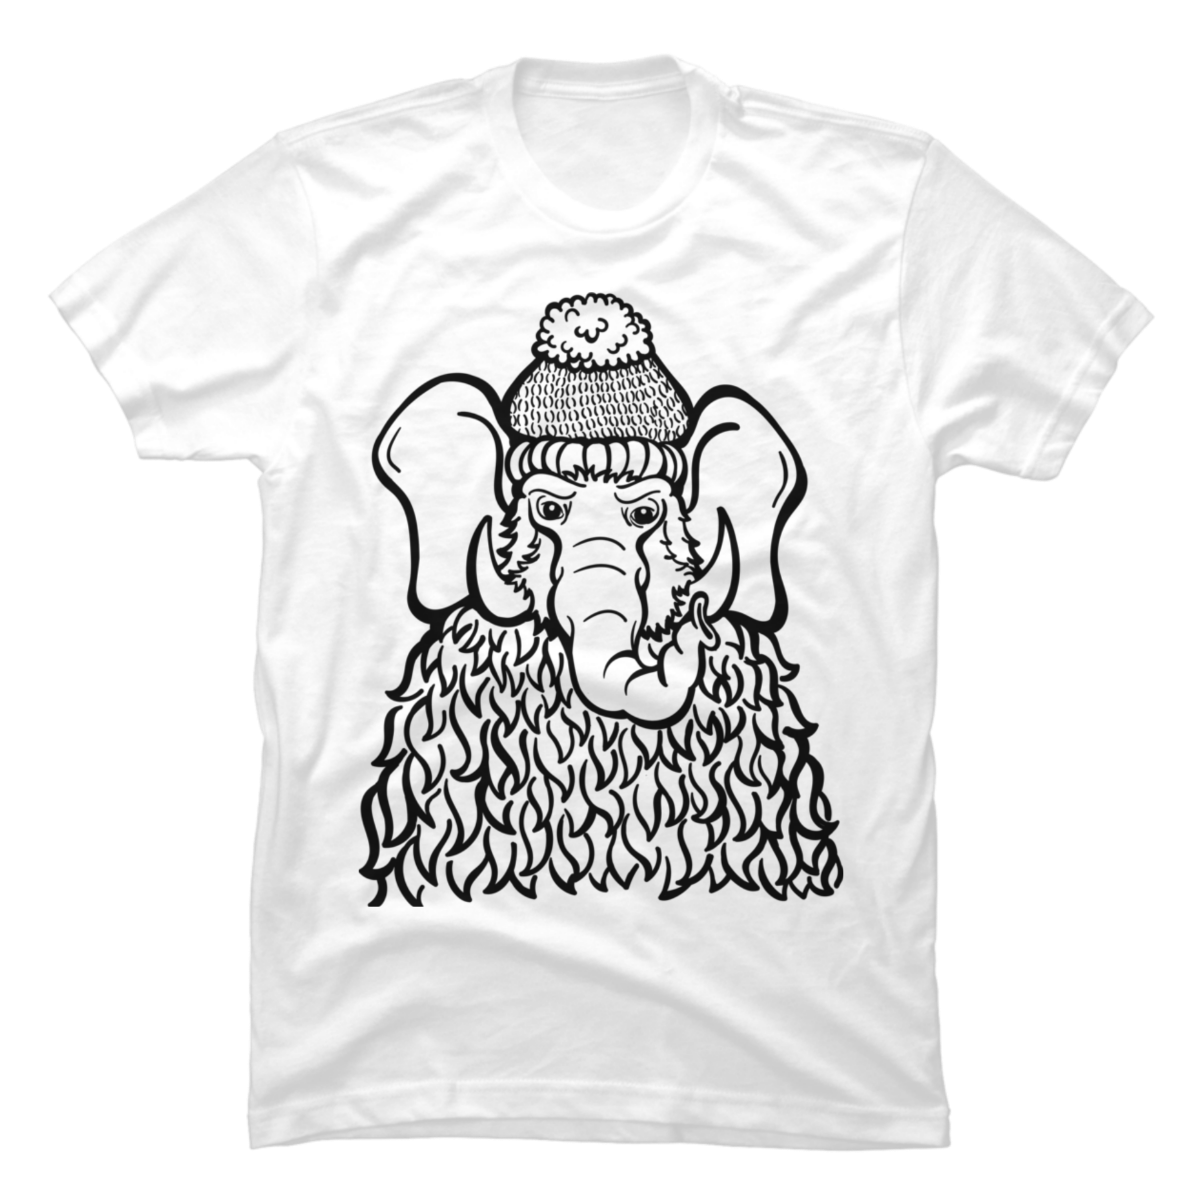 wooly mammoth t shirt